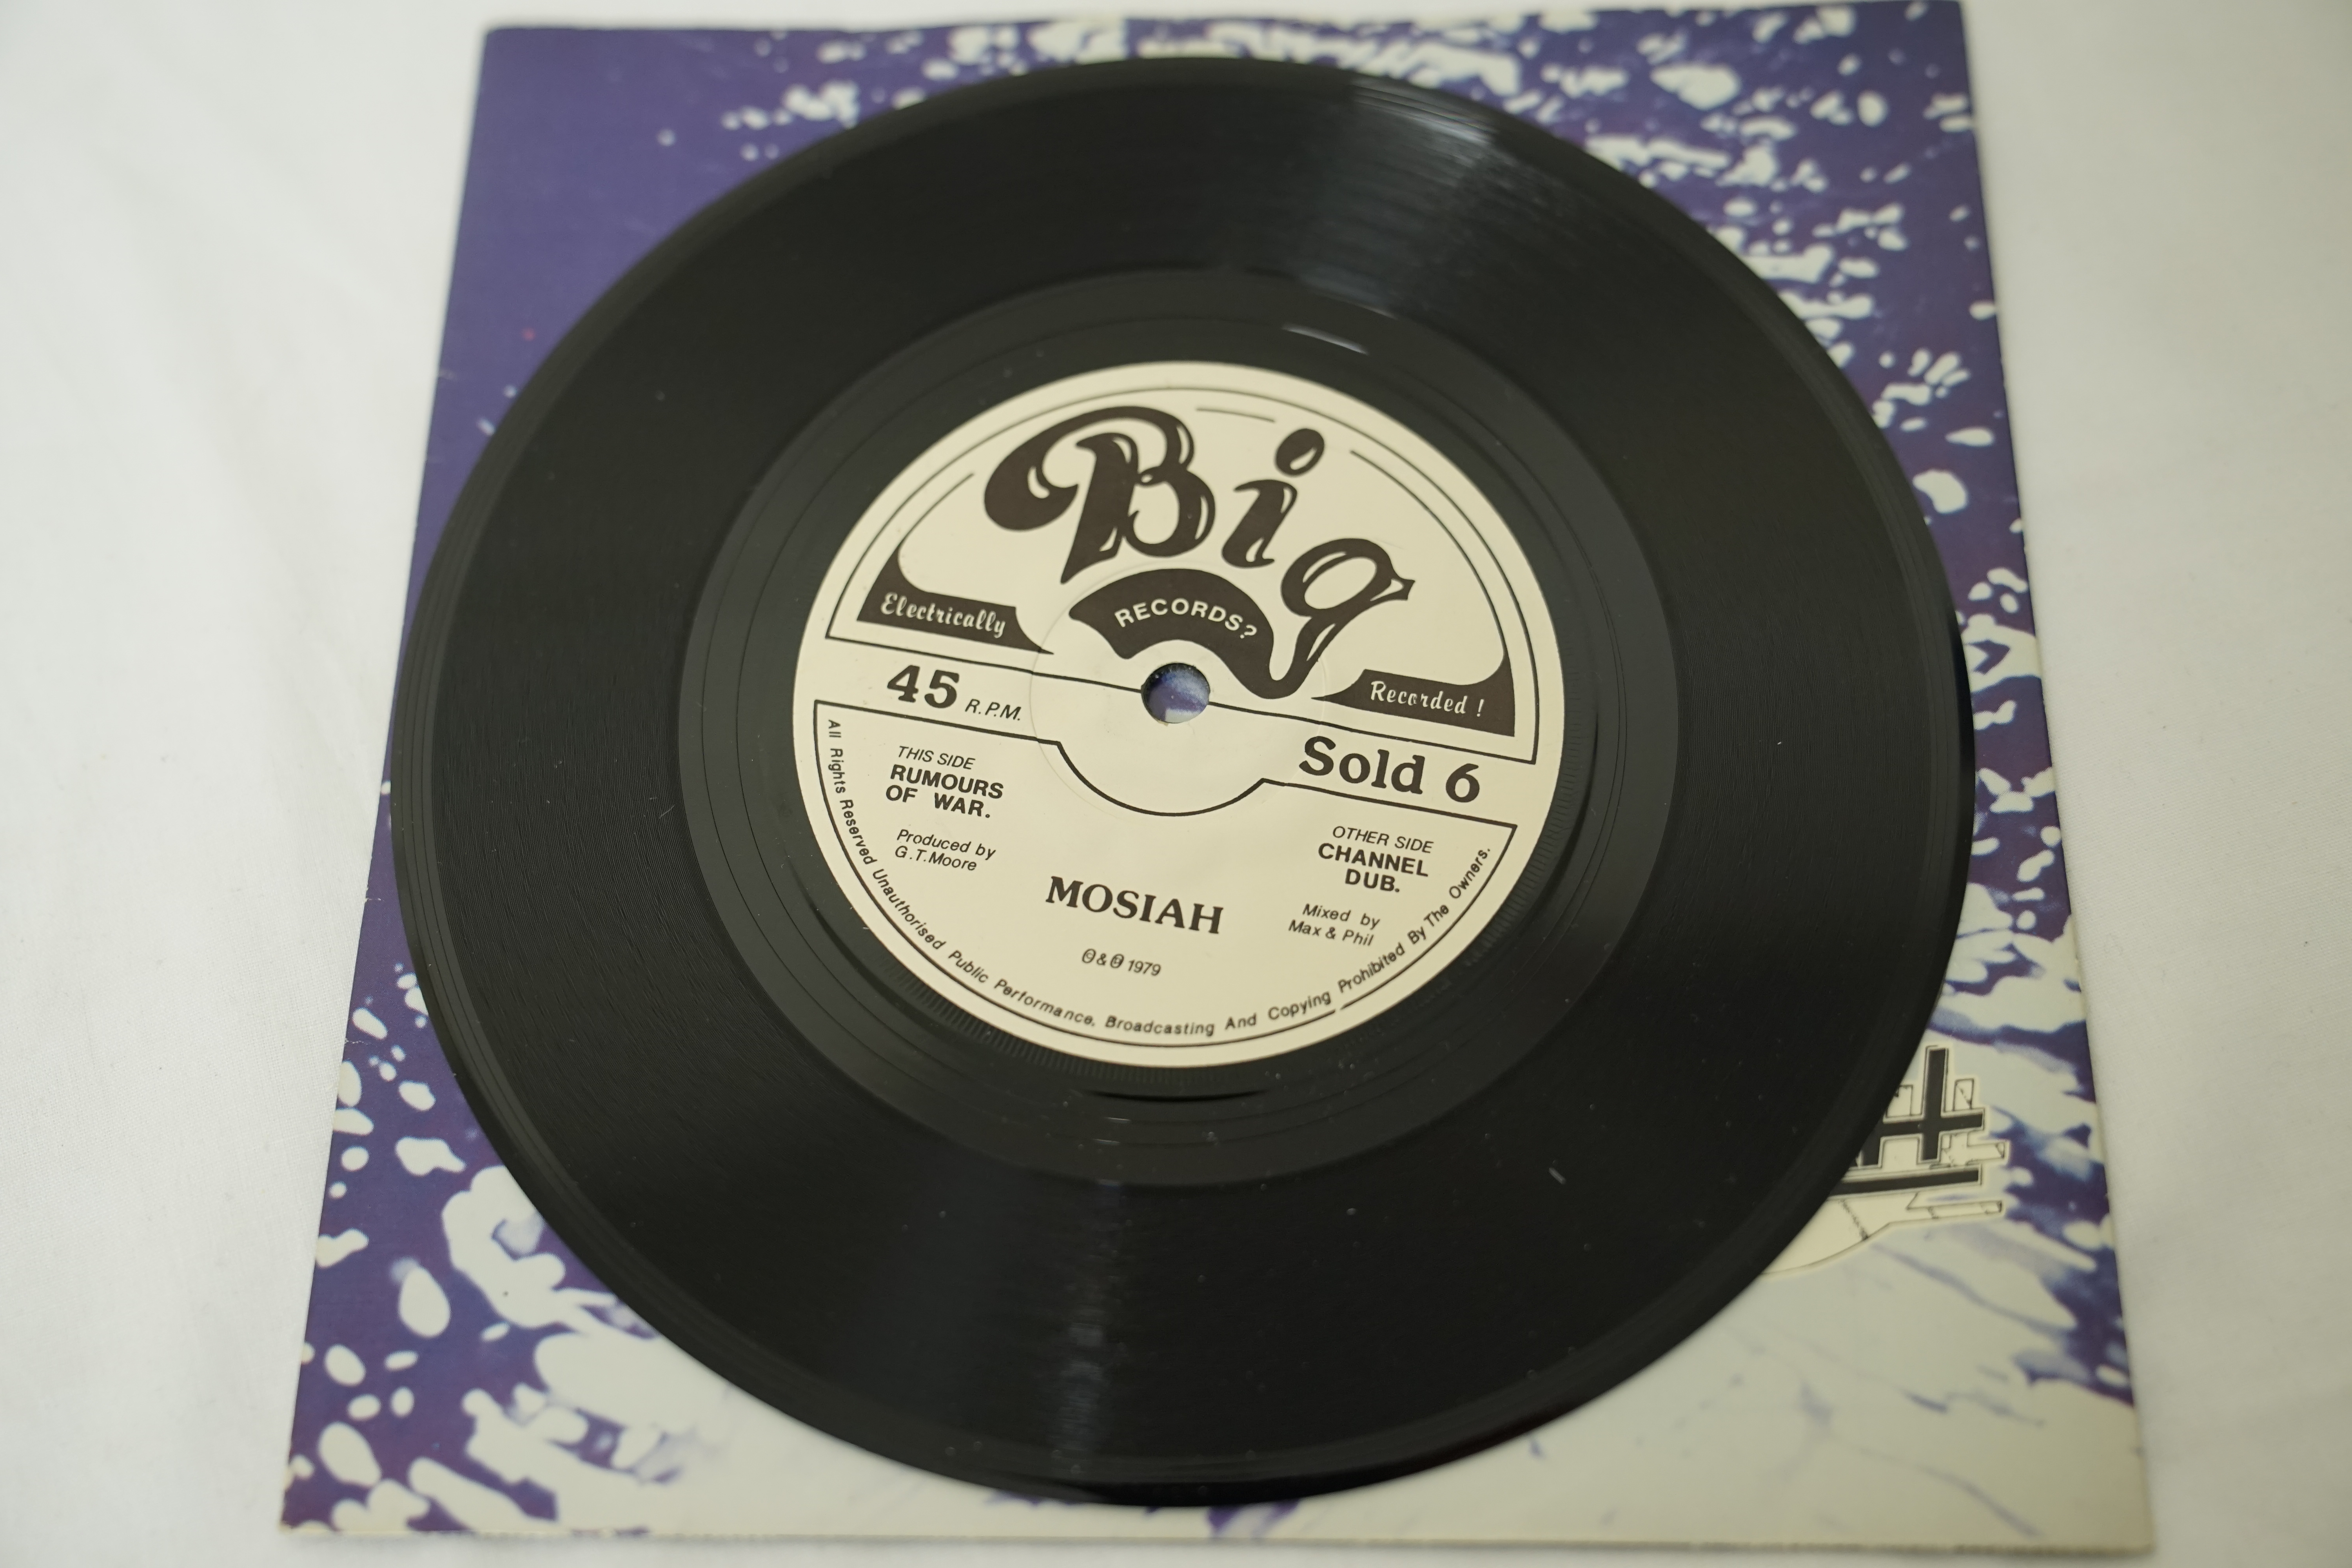 Vinyl - Mosiah - Channel Dub / Rumours Of War (Big Records SOLD 6 DEMO PROMO) NM archive - Image 2 of 4